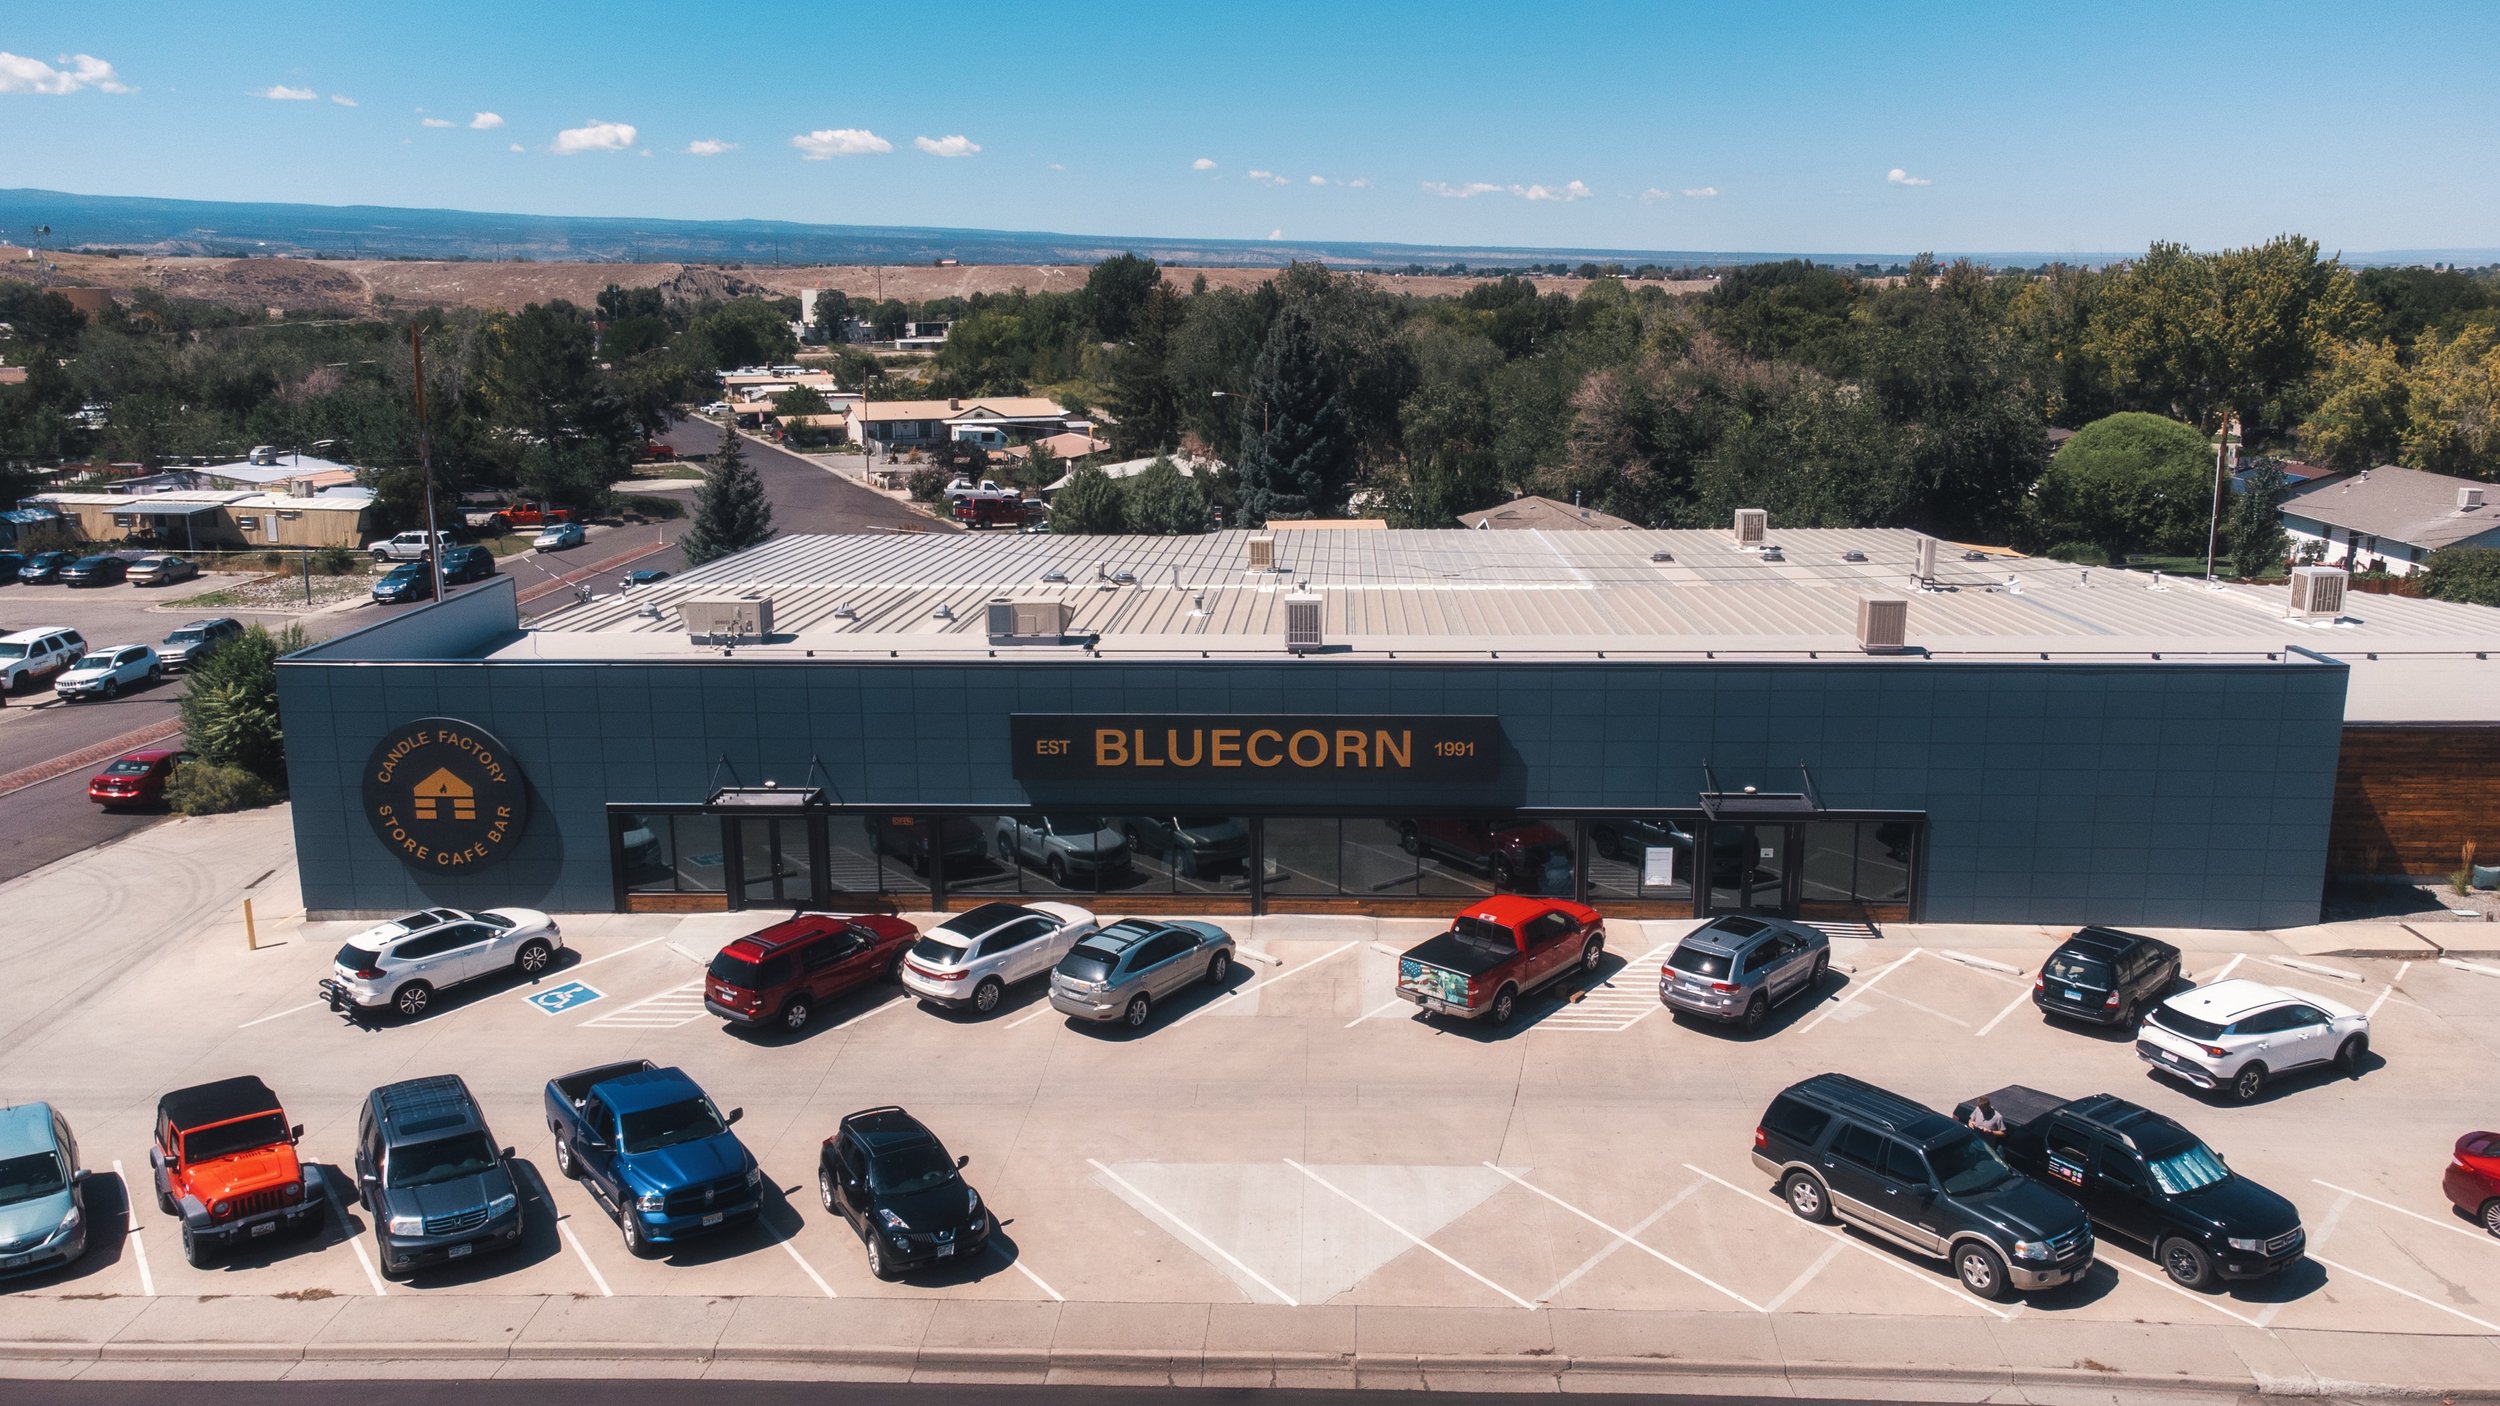 Bluecorn opens its cafe and retail shop